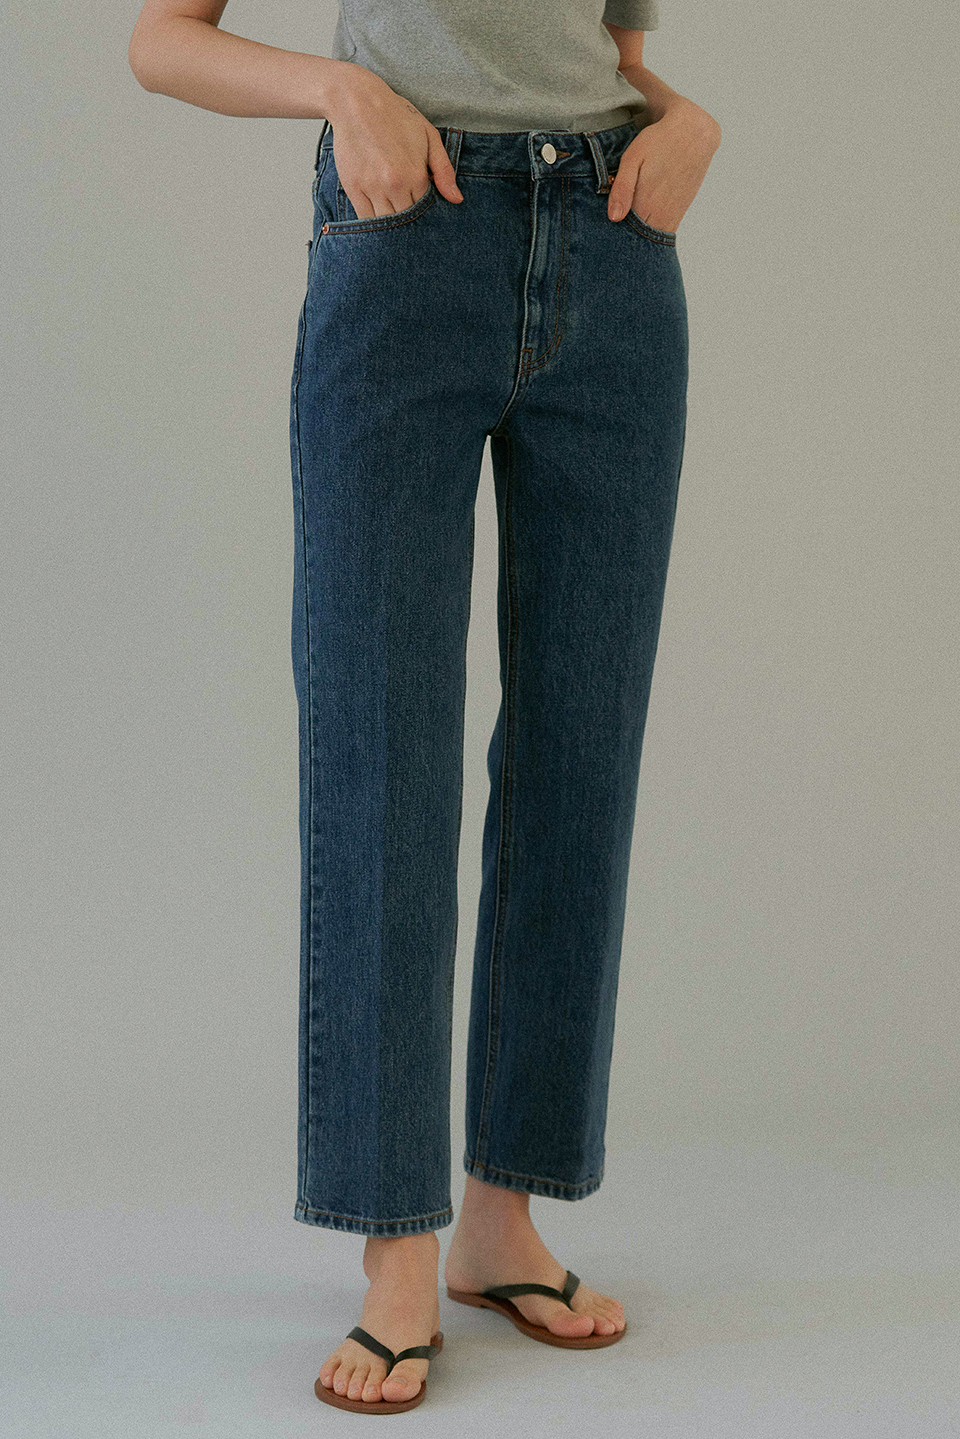 classic cropped jeans (classic blue)